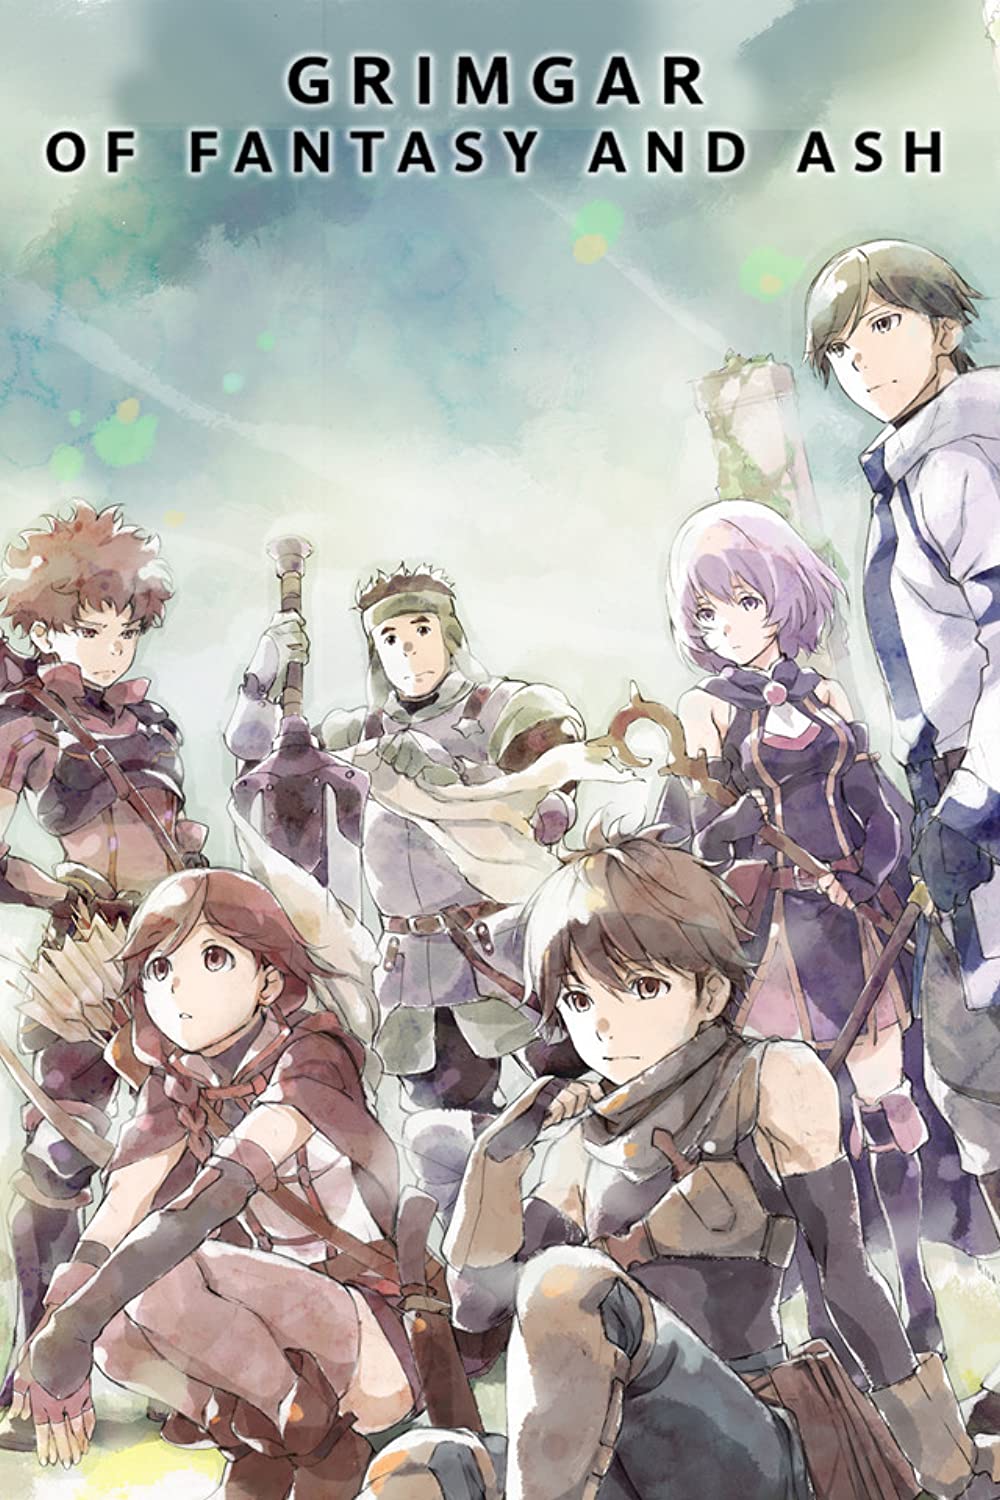 Grimgar, Ashes and Illusions (TV Series 2016)